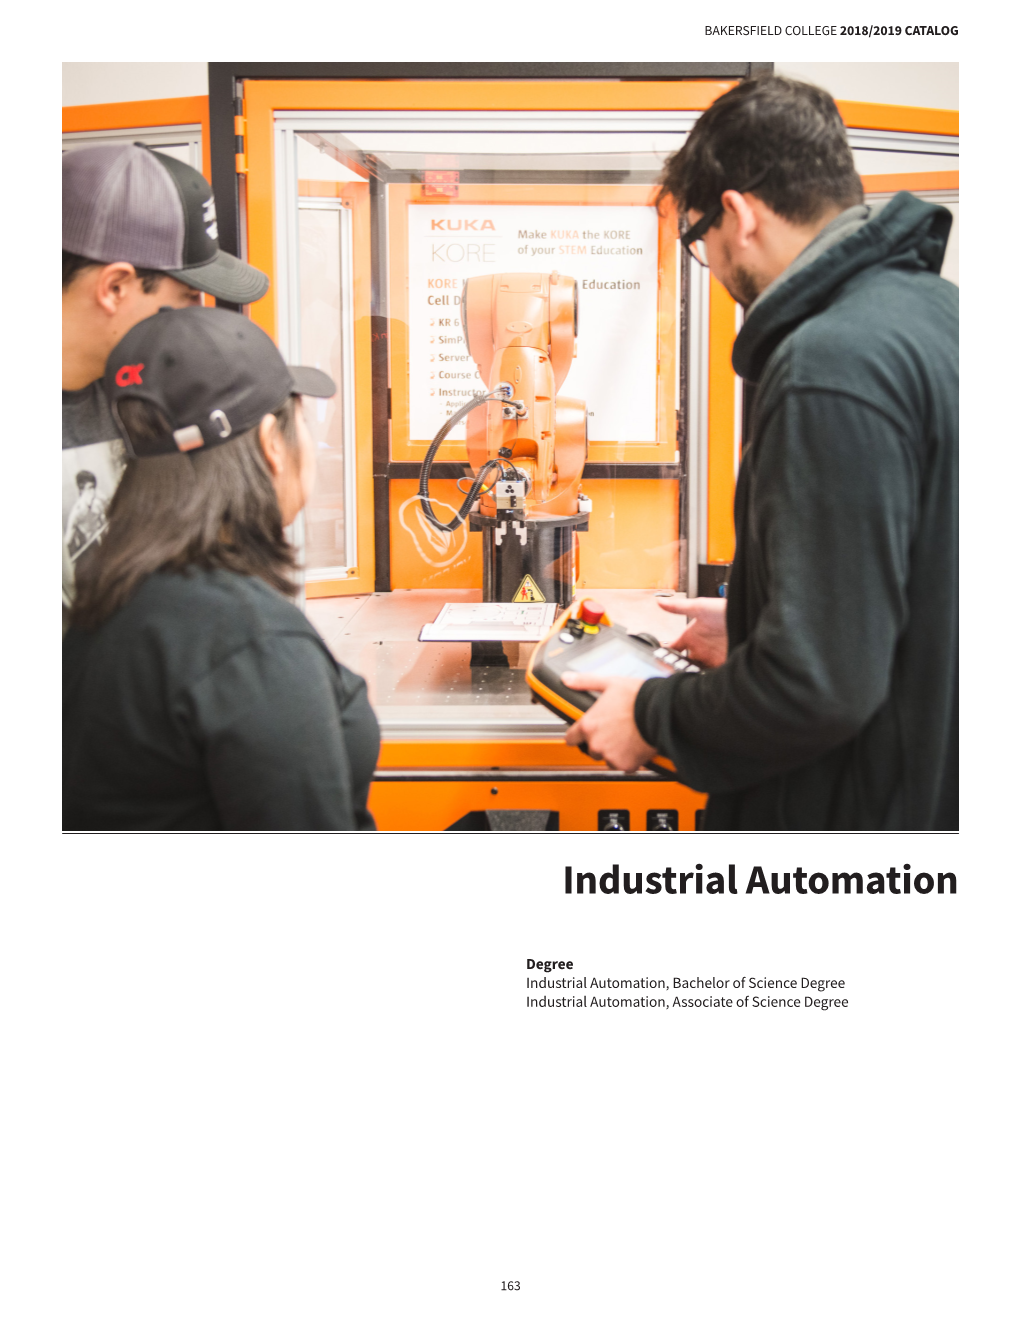 Industrial Automation Programs